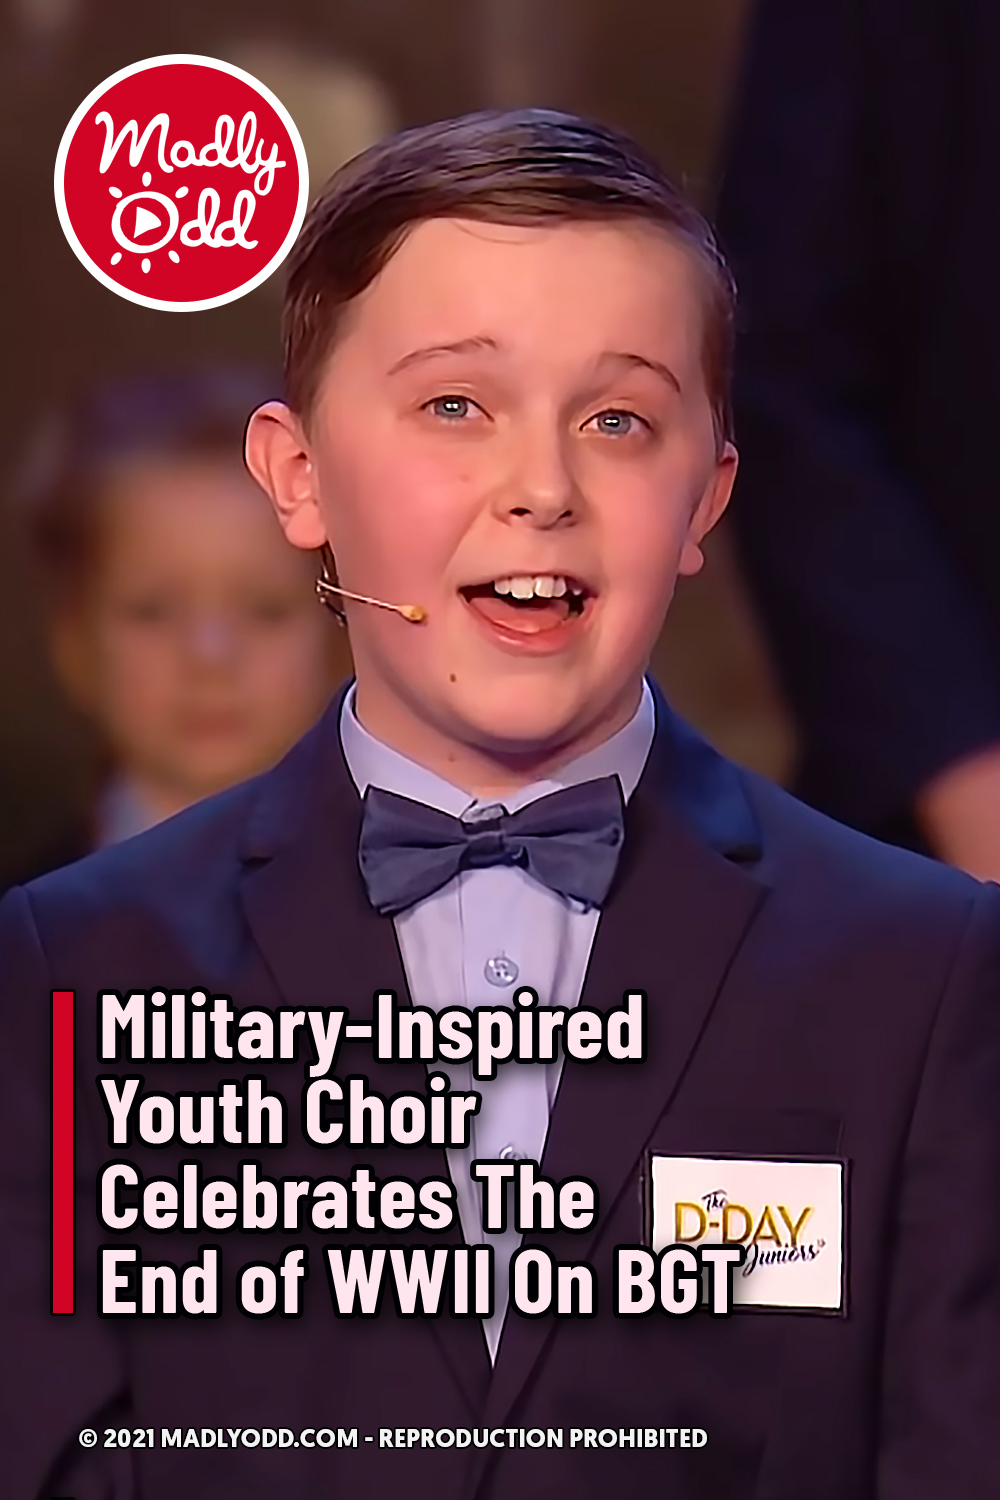 Military-Inspired Youth Choir Celebrates The End of WWII On BGT